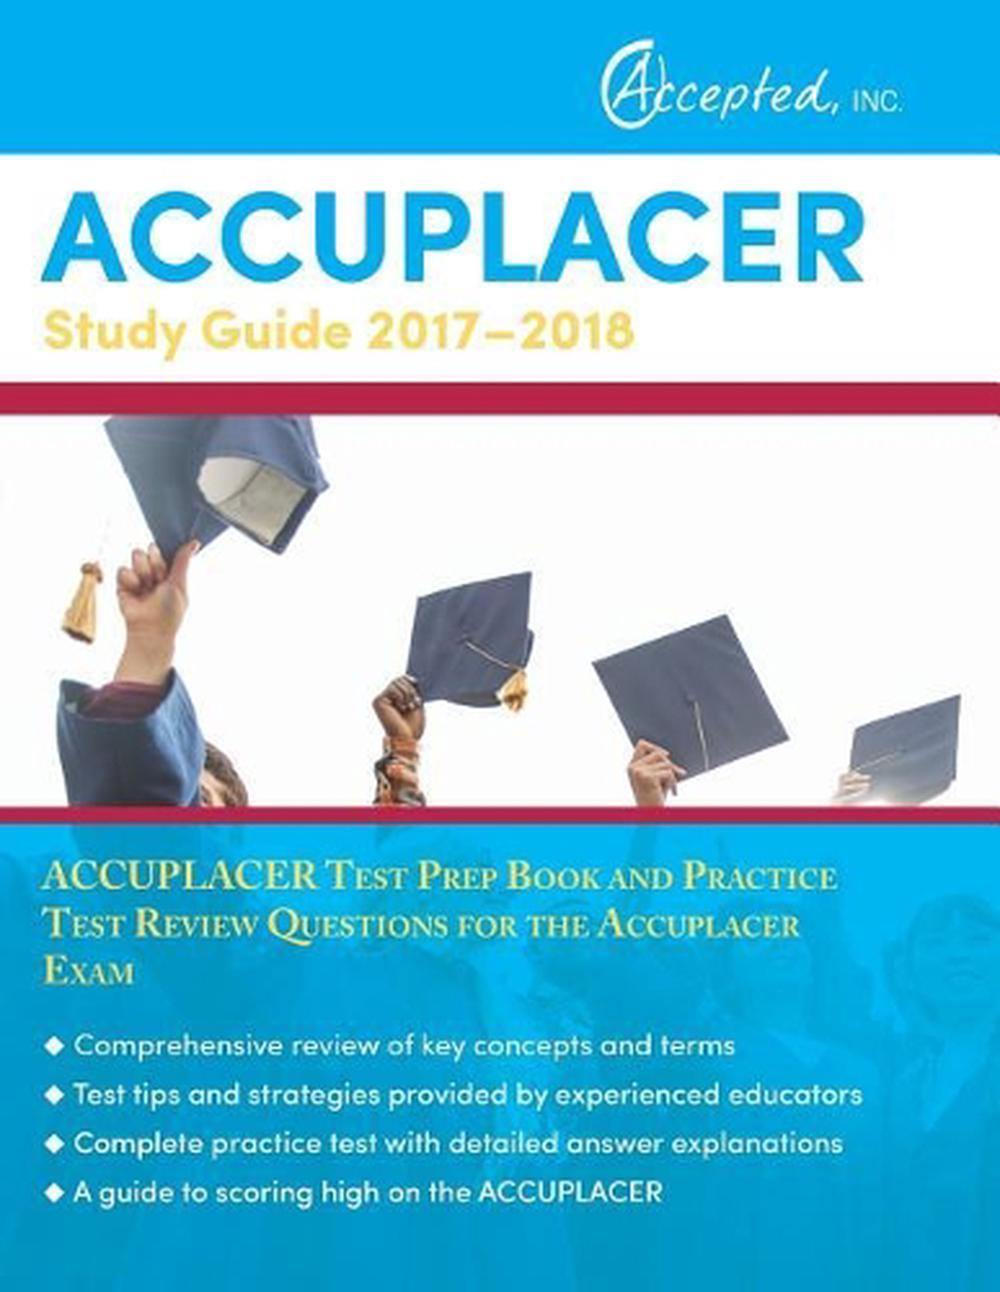 Accuplacer Study Guide 20172018 Accuplacer Test Prep Book and